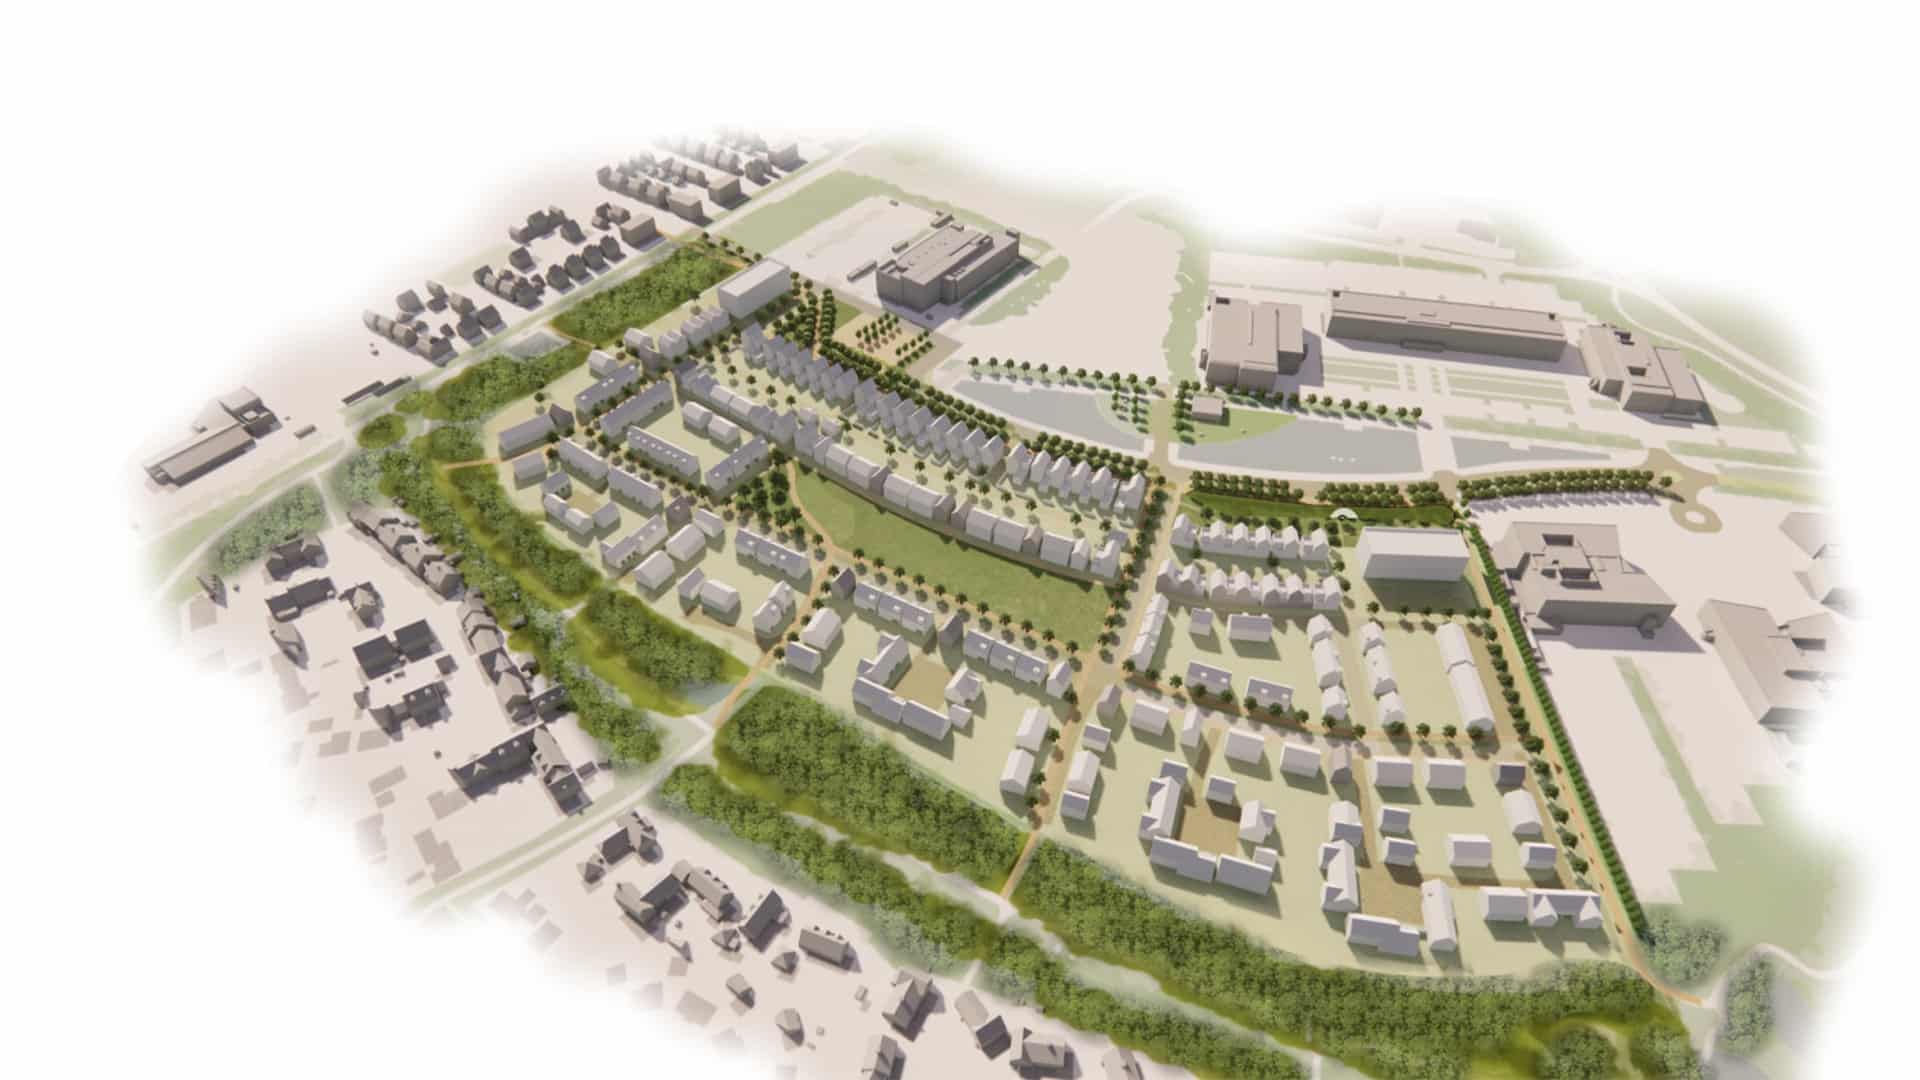 256 low-carbon homes in Cambourne